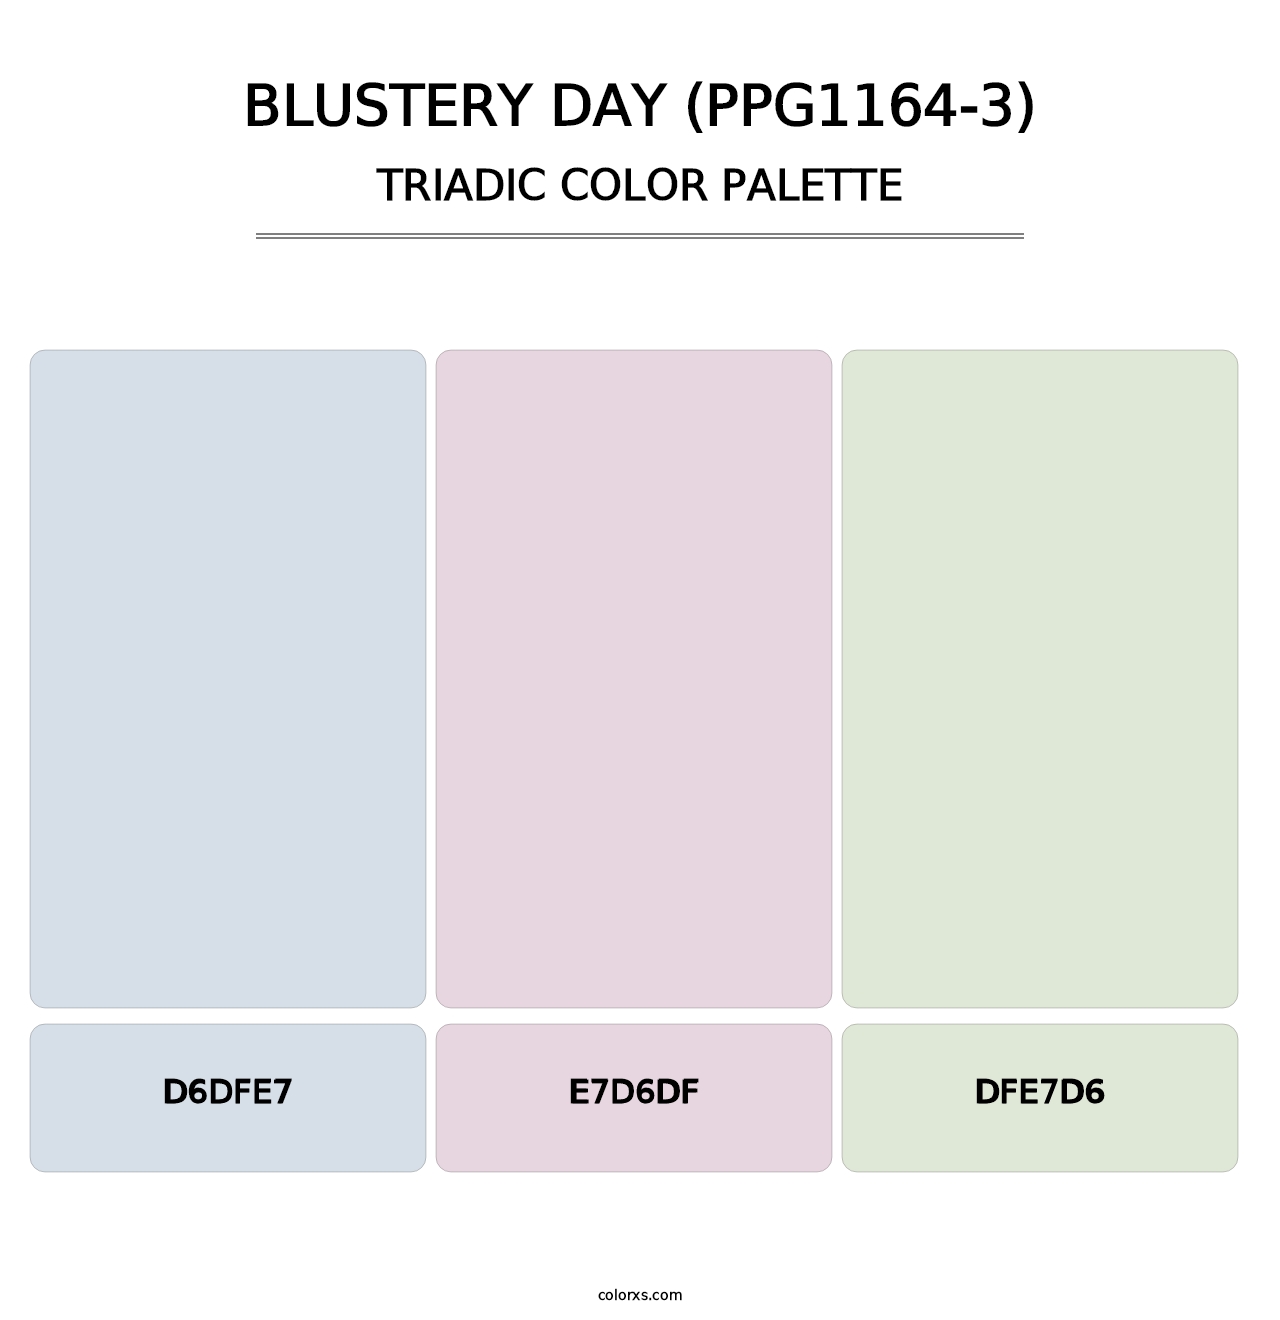 Blustery Day (PPG1164-3) - Triadic Color Palette